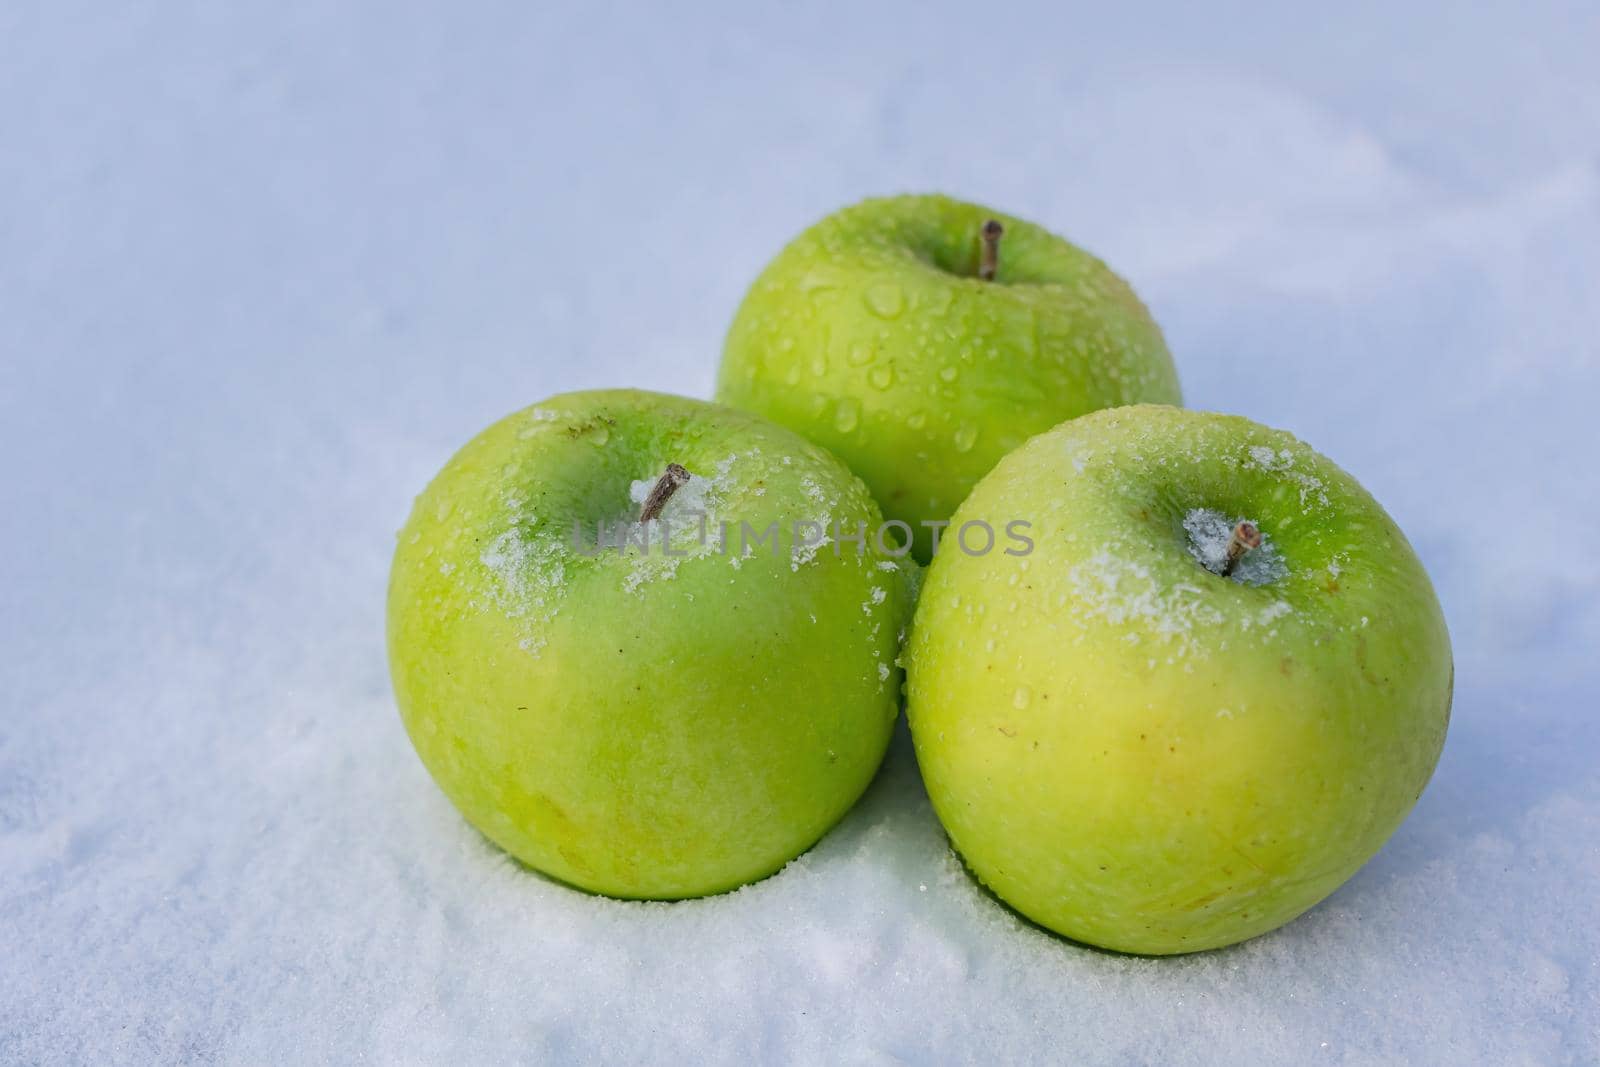 Green apples slowly freeze on the snow during a harsh, cold winter